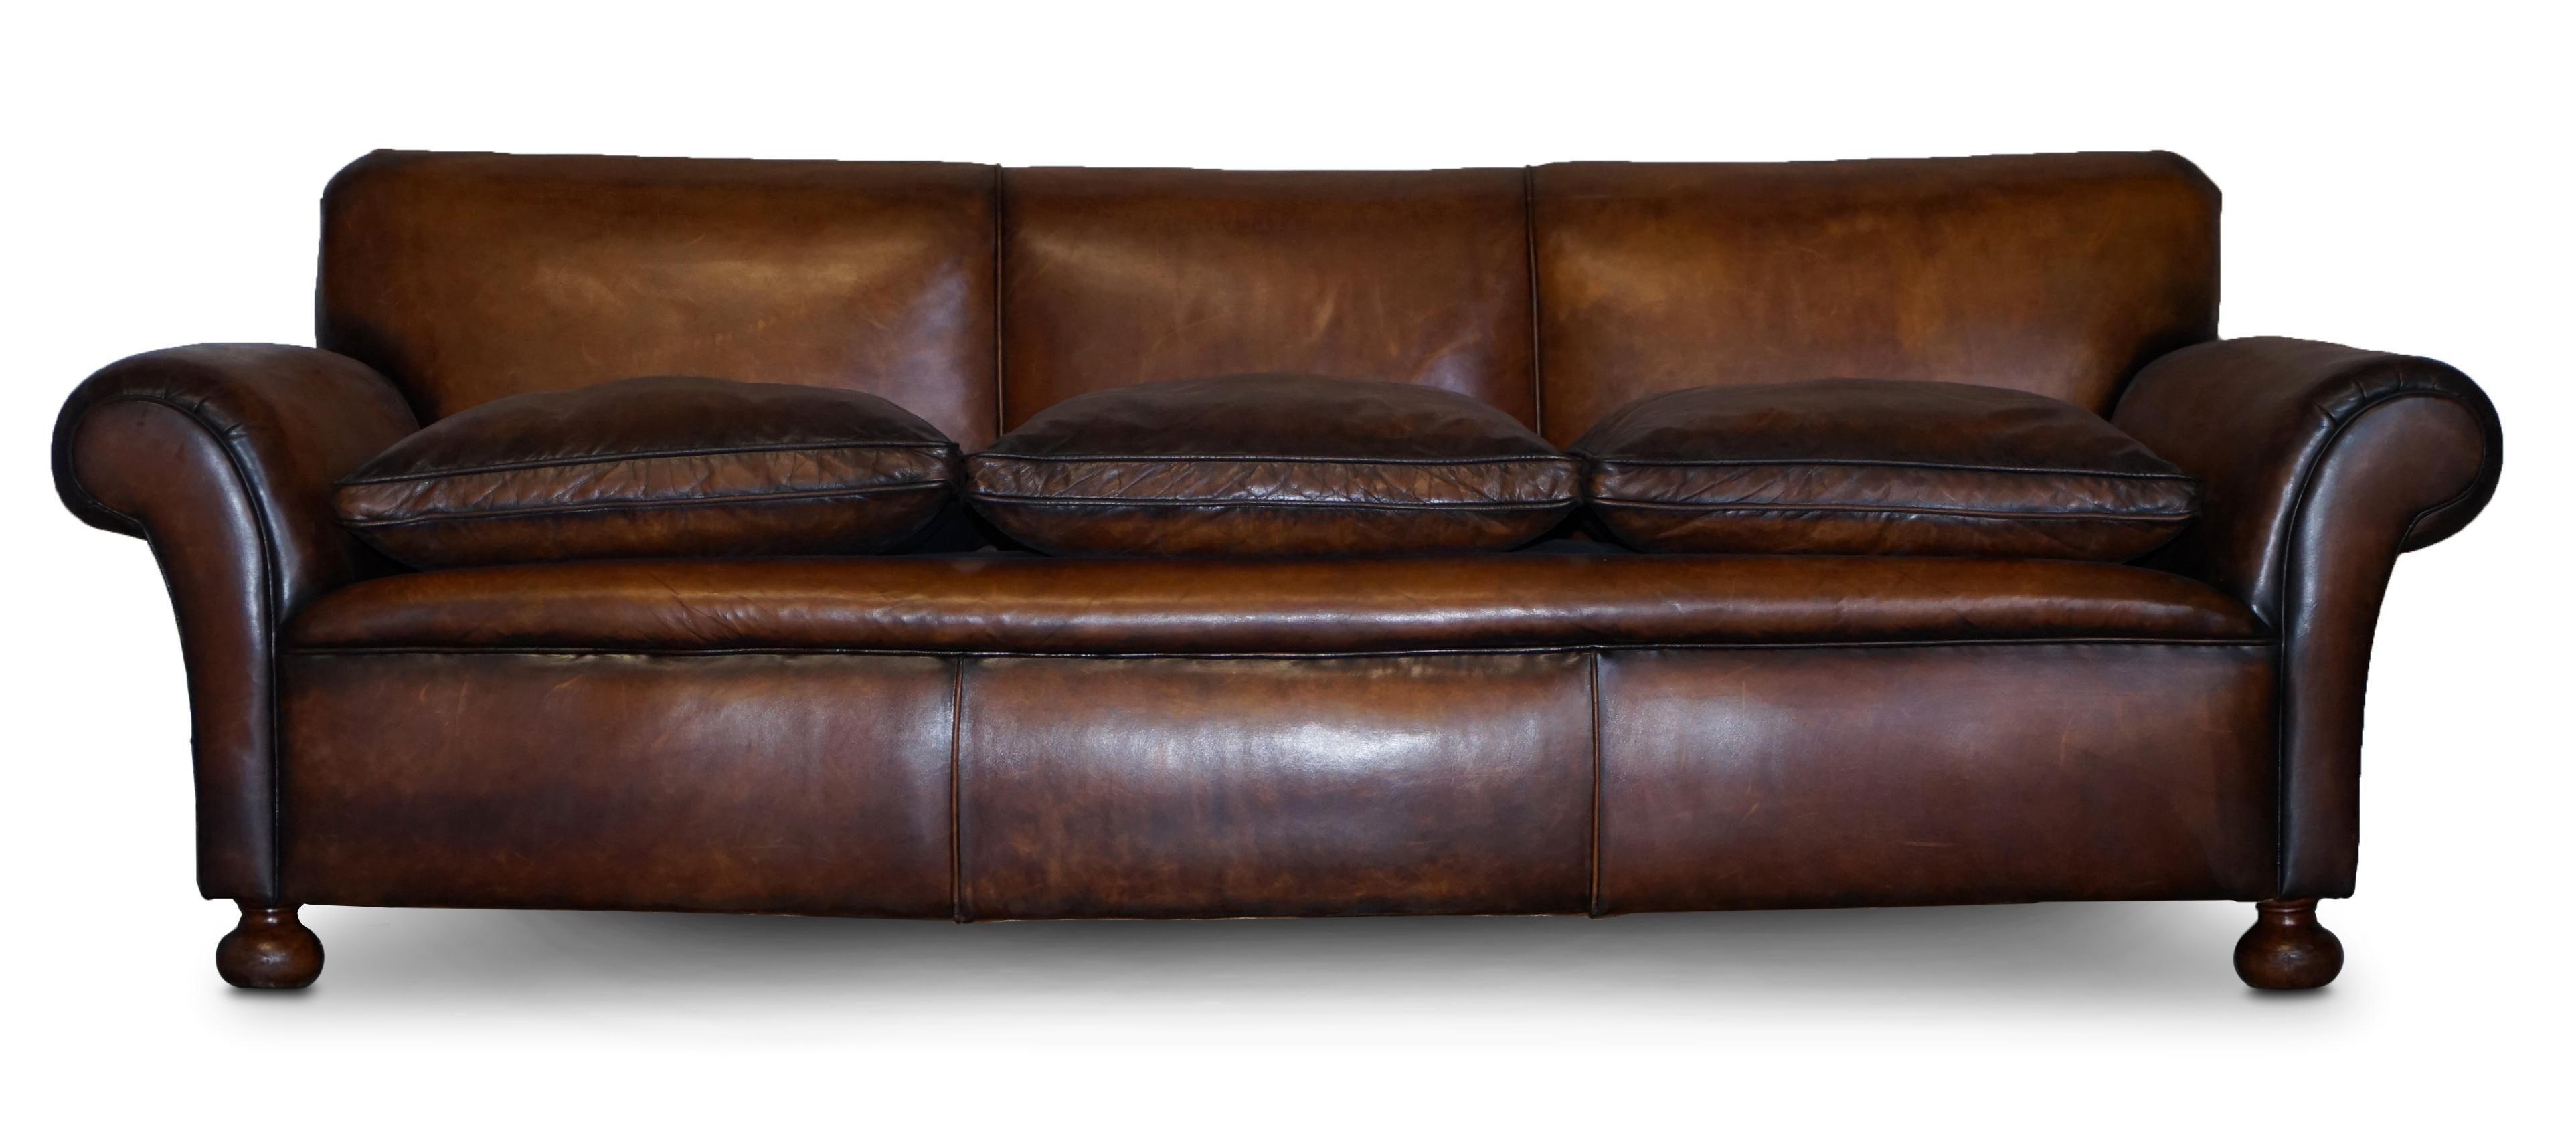 Royal House Antiques

Royal House Antiques is delighted to this stunning three to four seat antique hand dyed Victorian brown leather sofa with feather filled cushions

This is a very fine and well made English Victorian sofa, it has a coil